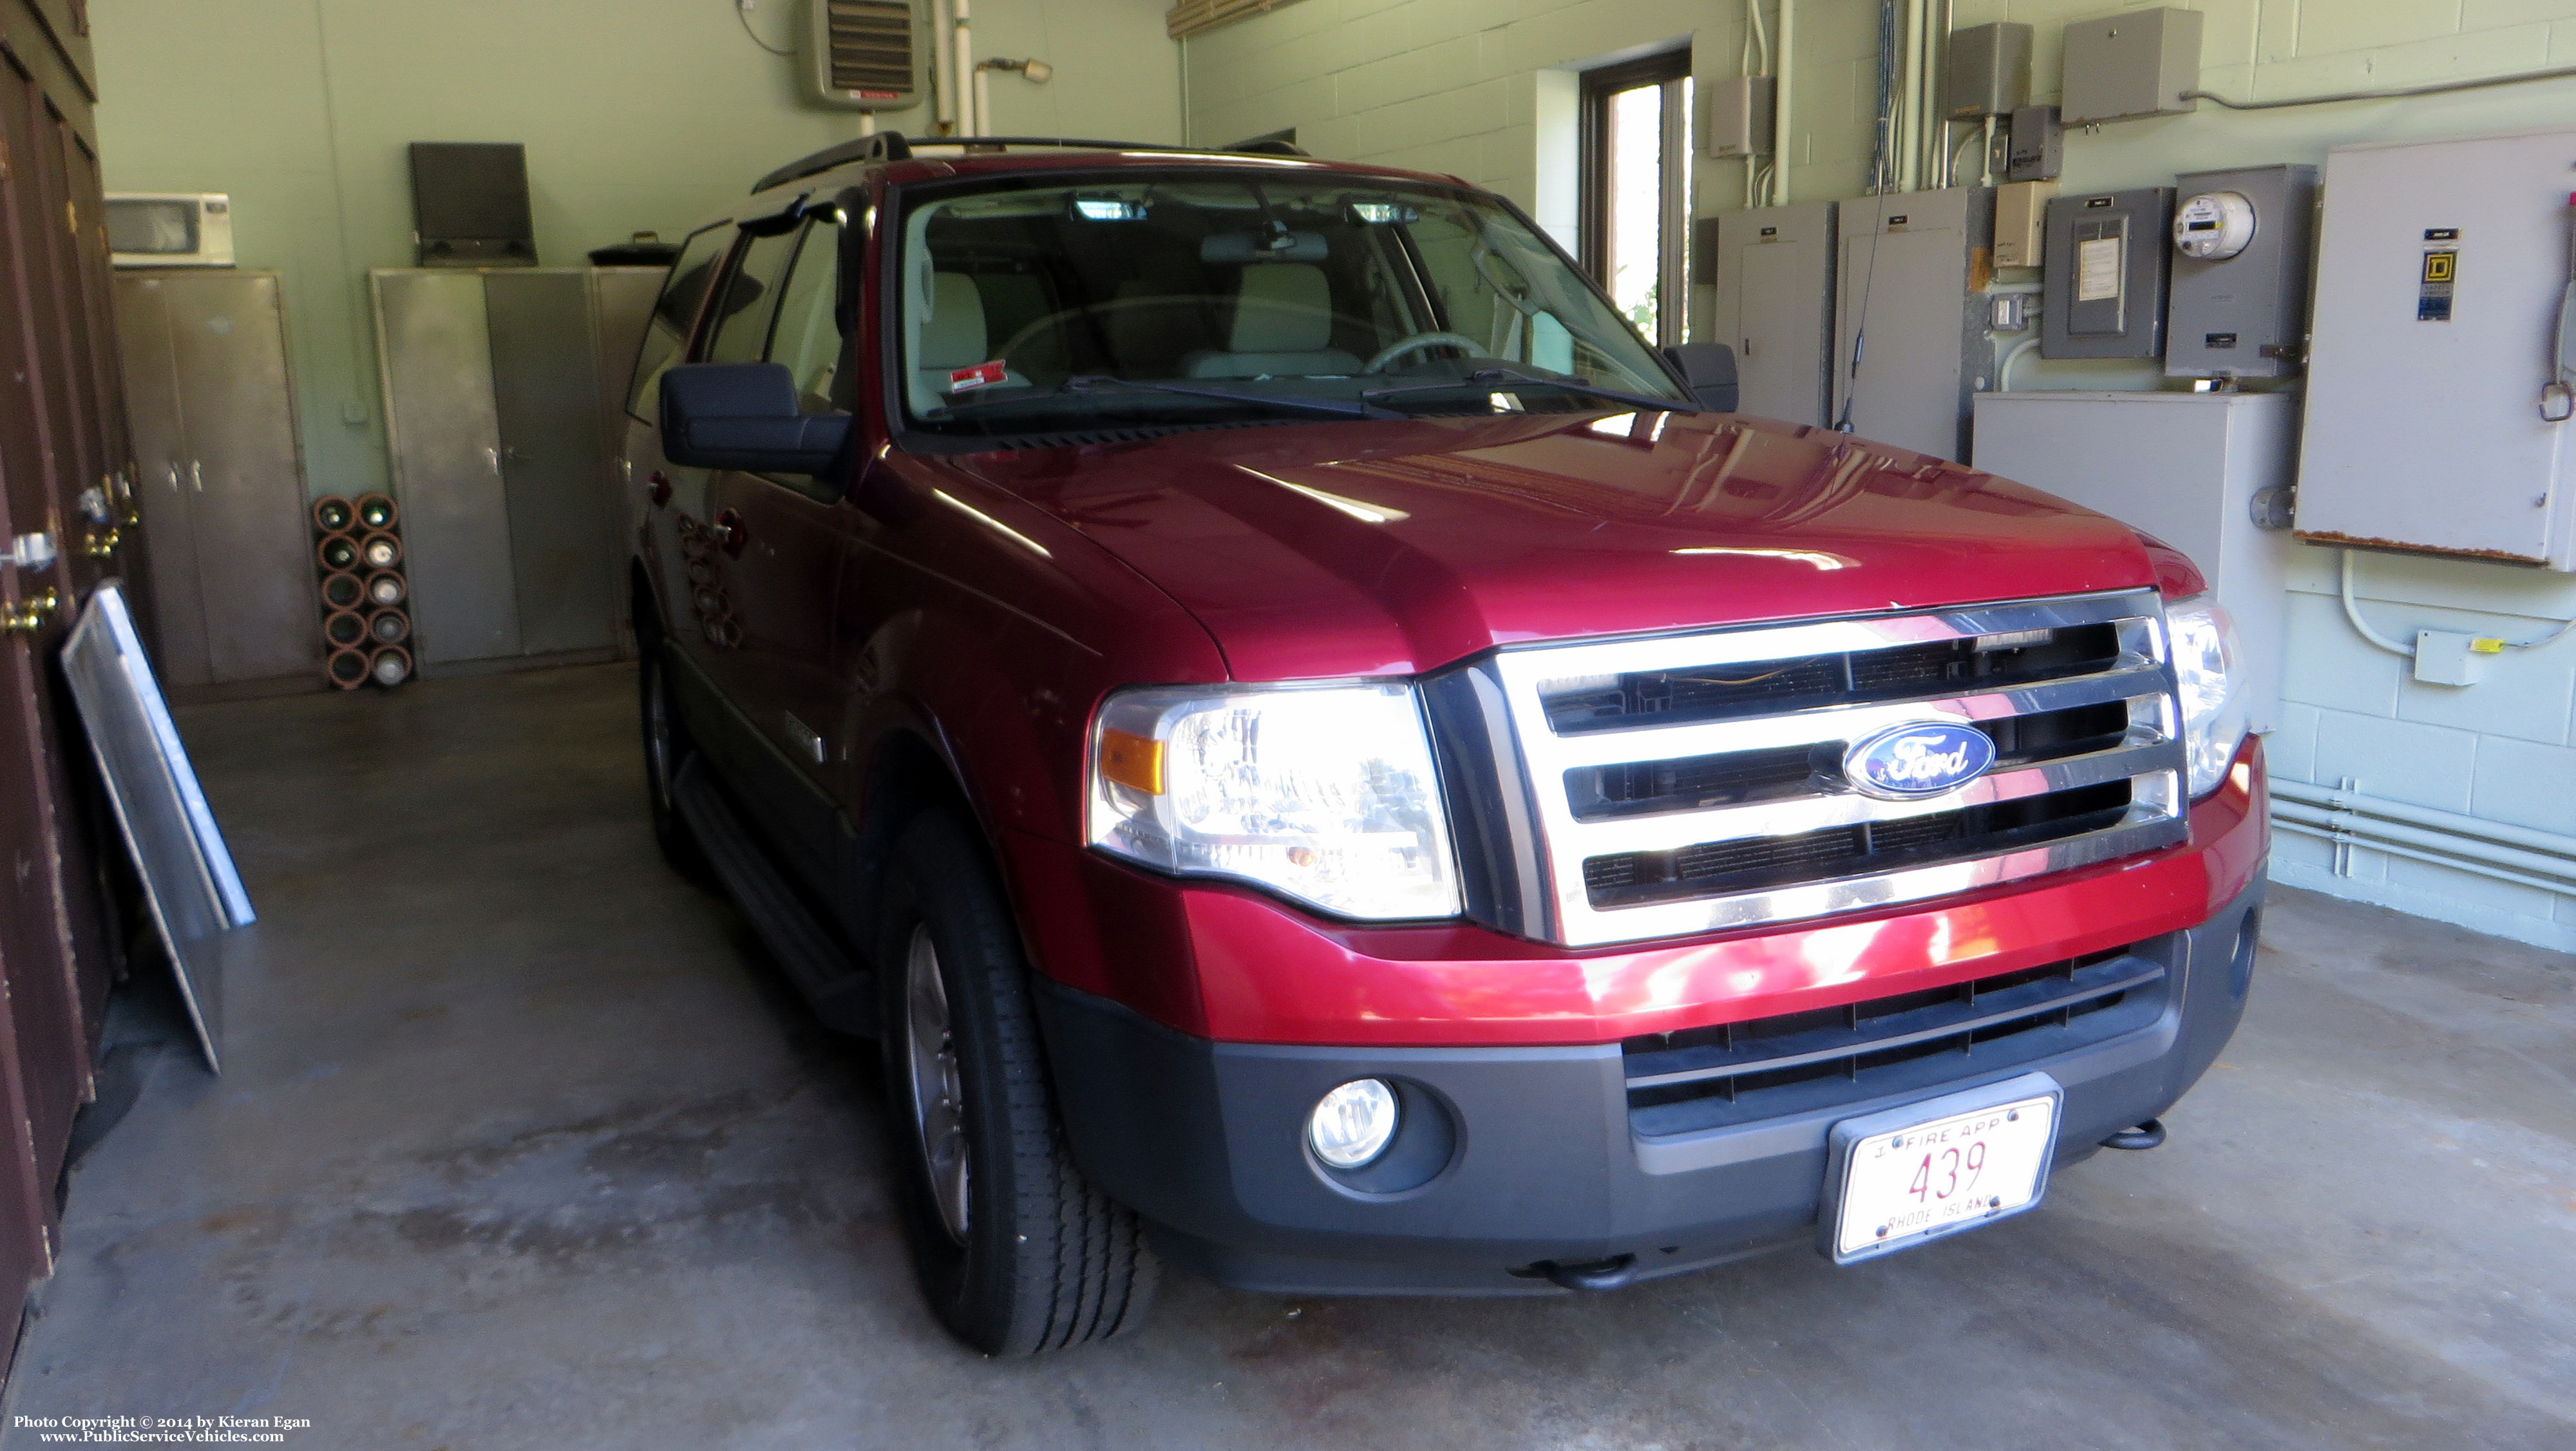 A photo  of Harmony Fire District
            Car 2, a 2007-2013 Ford Expedition             taken by Kieran Egan